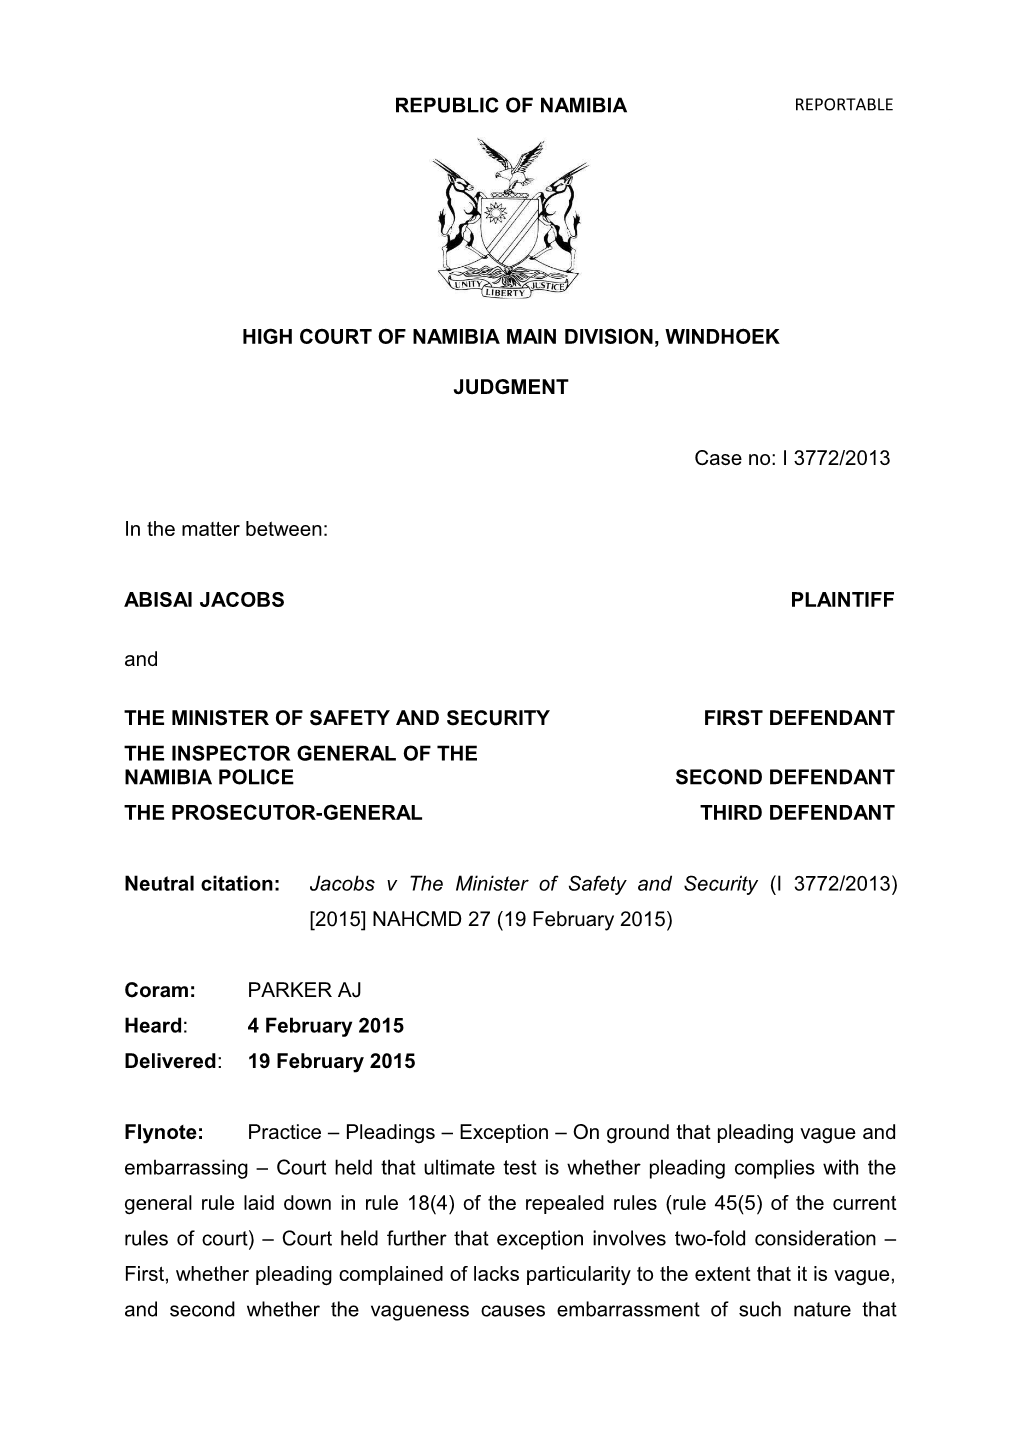 Jacobs V the Minister of Safety and Security (I 3772-2013) 2015 NAHCMD 27 (19 February 2015)